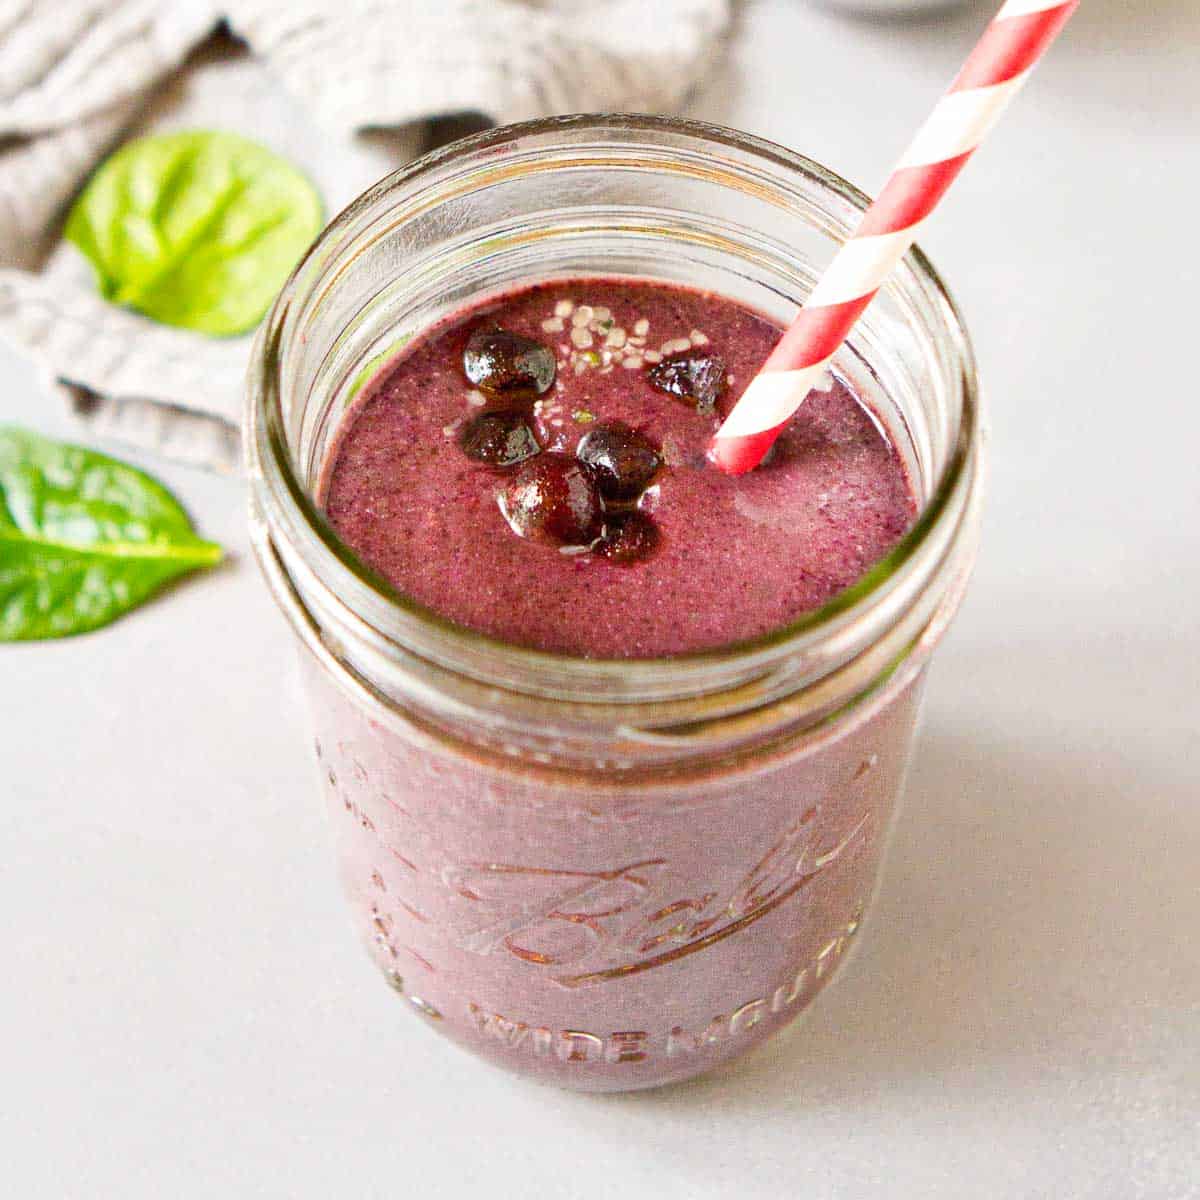 Blueberry smoothie in a mason jar, with a red and white straw.